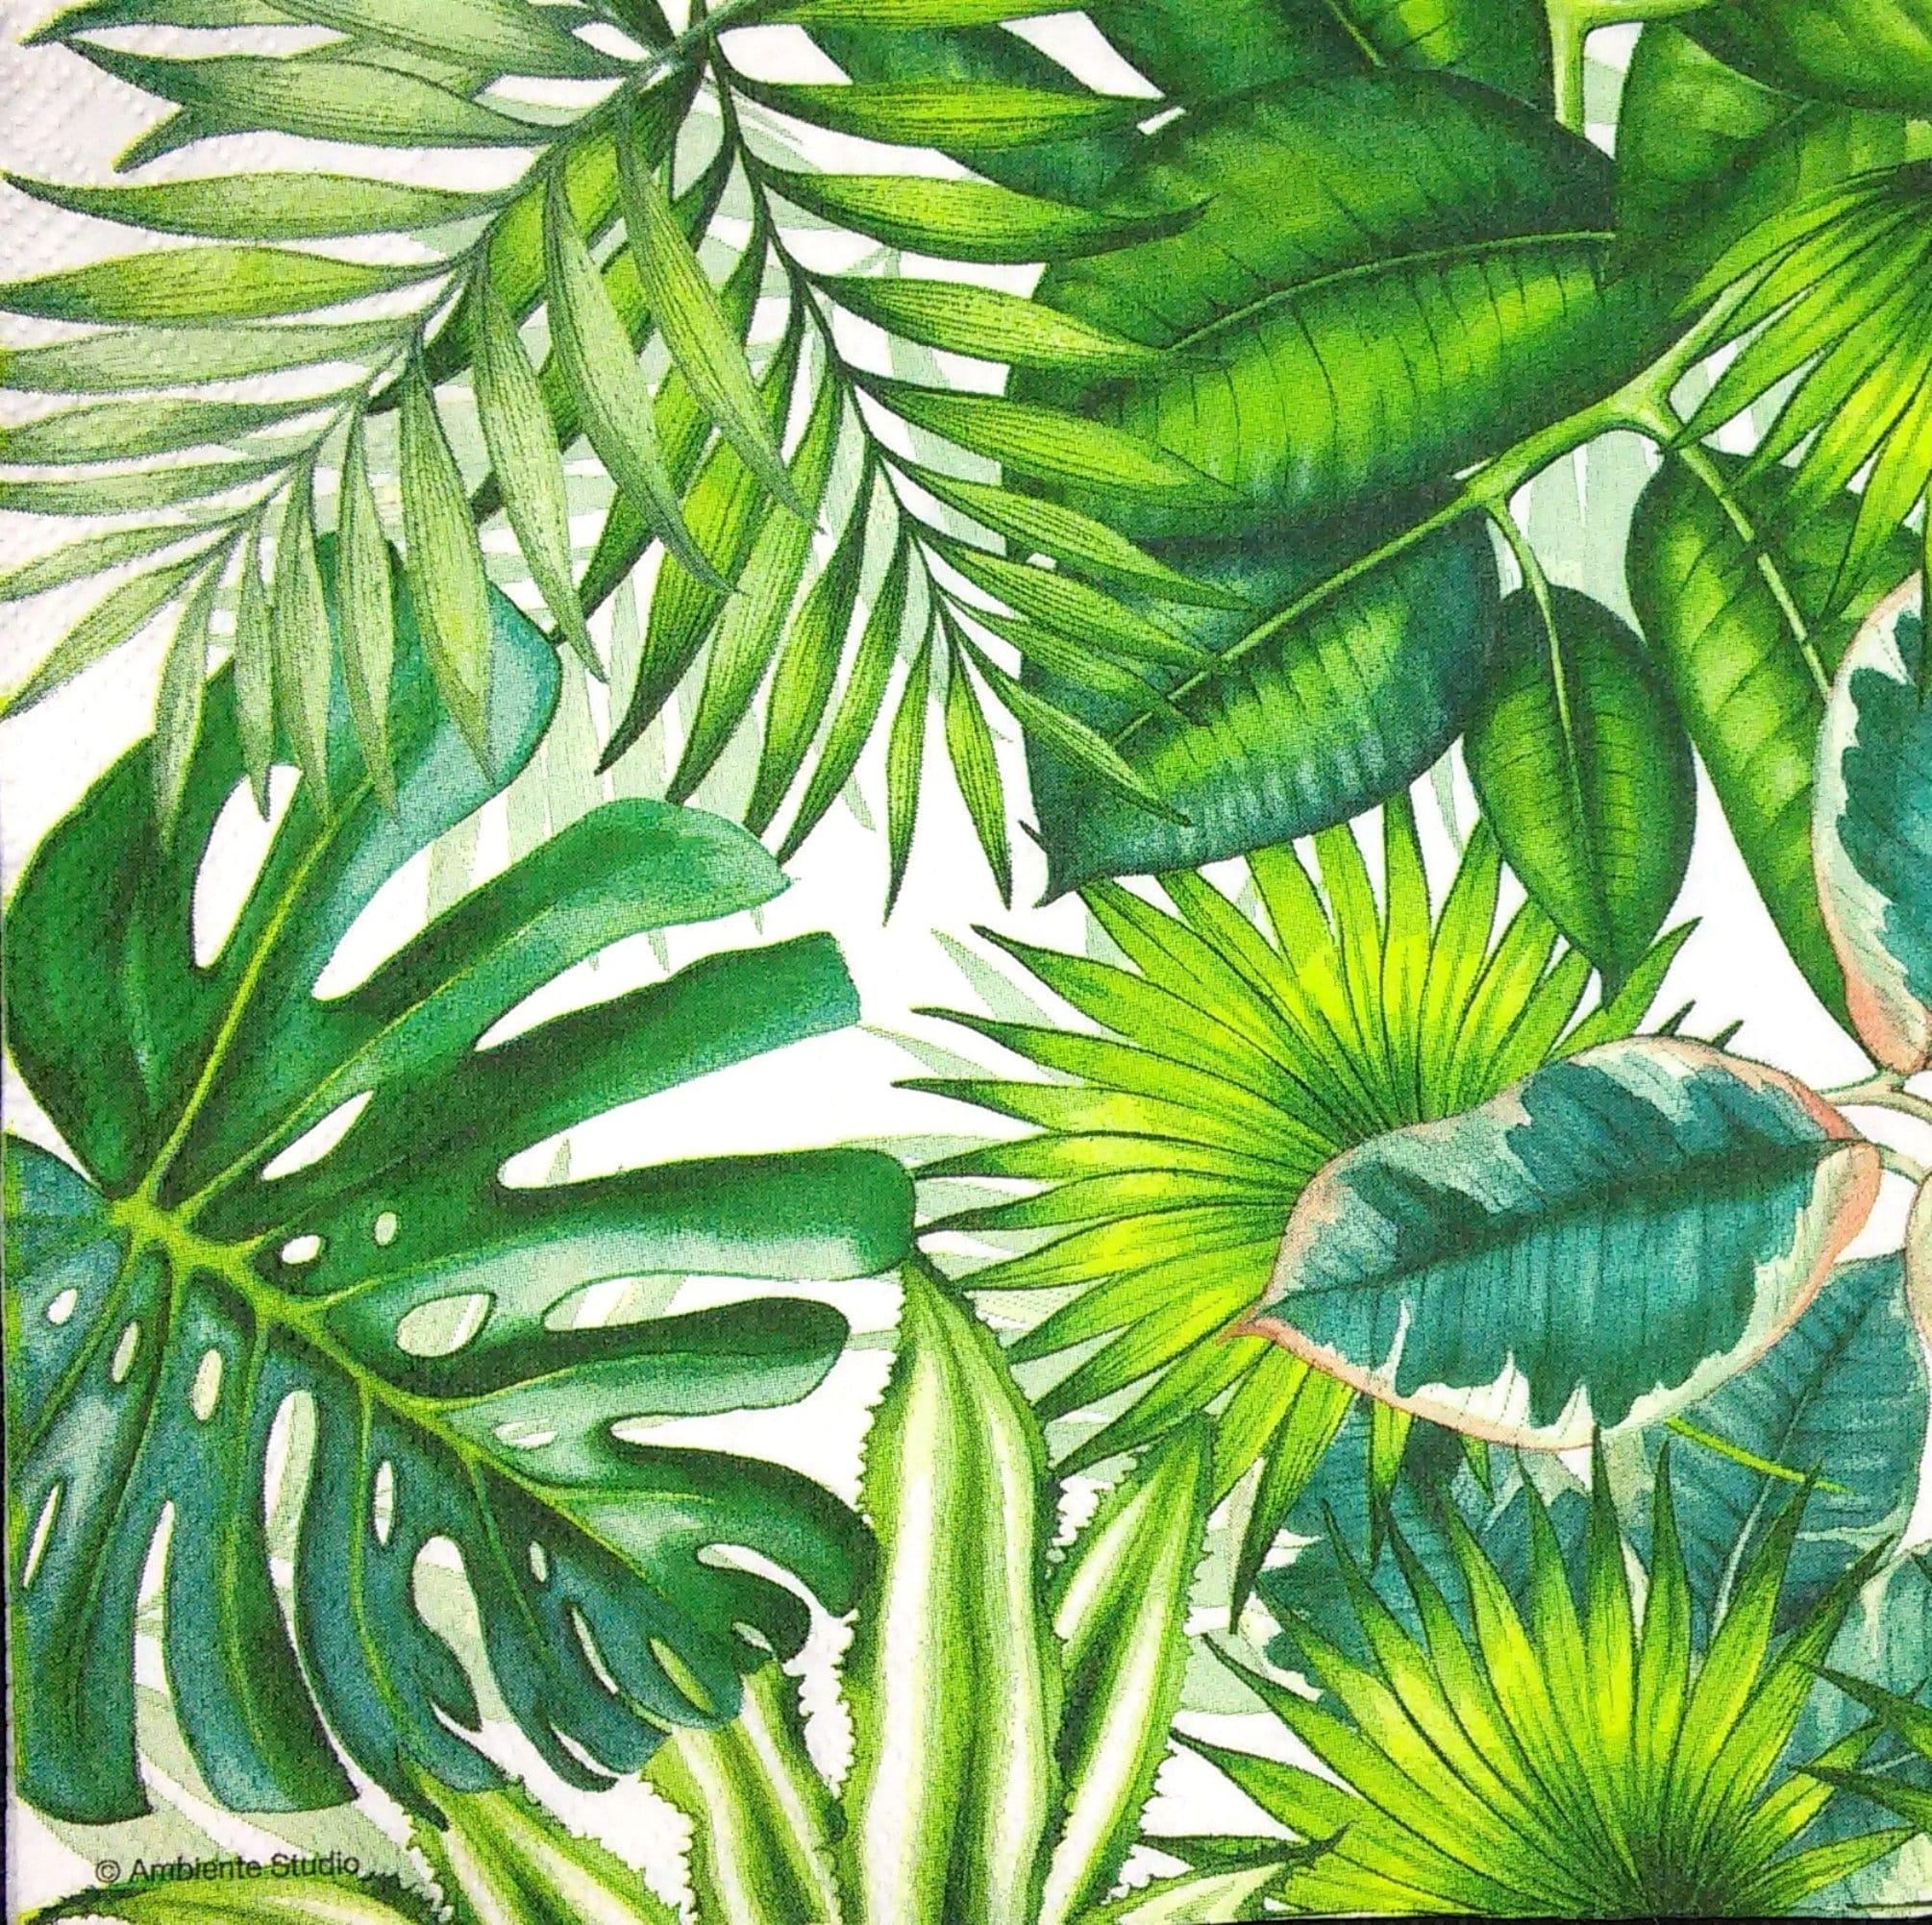 3 x Single Paper Napkins For Decoupage Craft Green Jungle Leaves Pattern M479